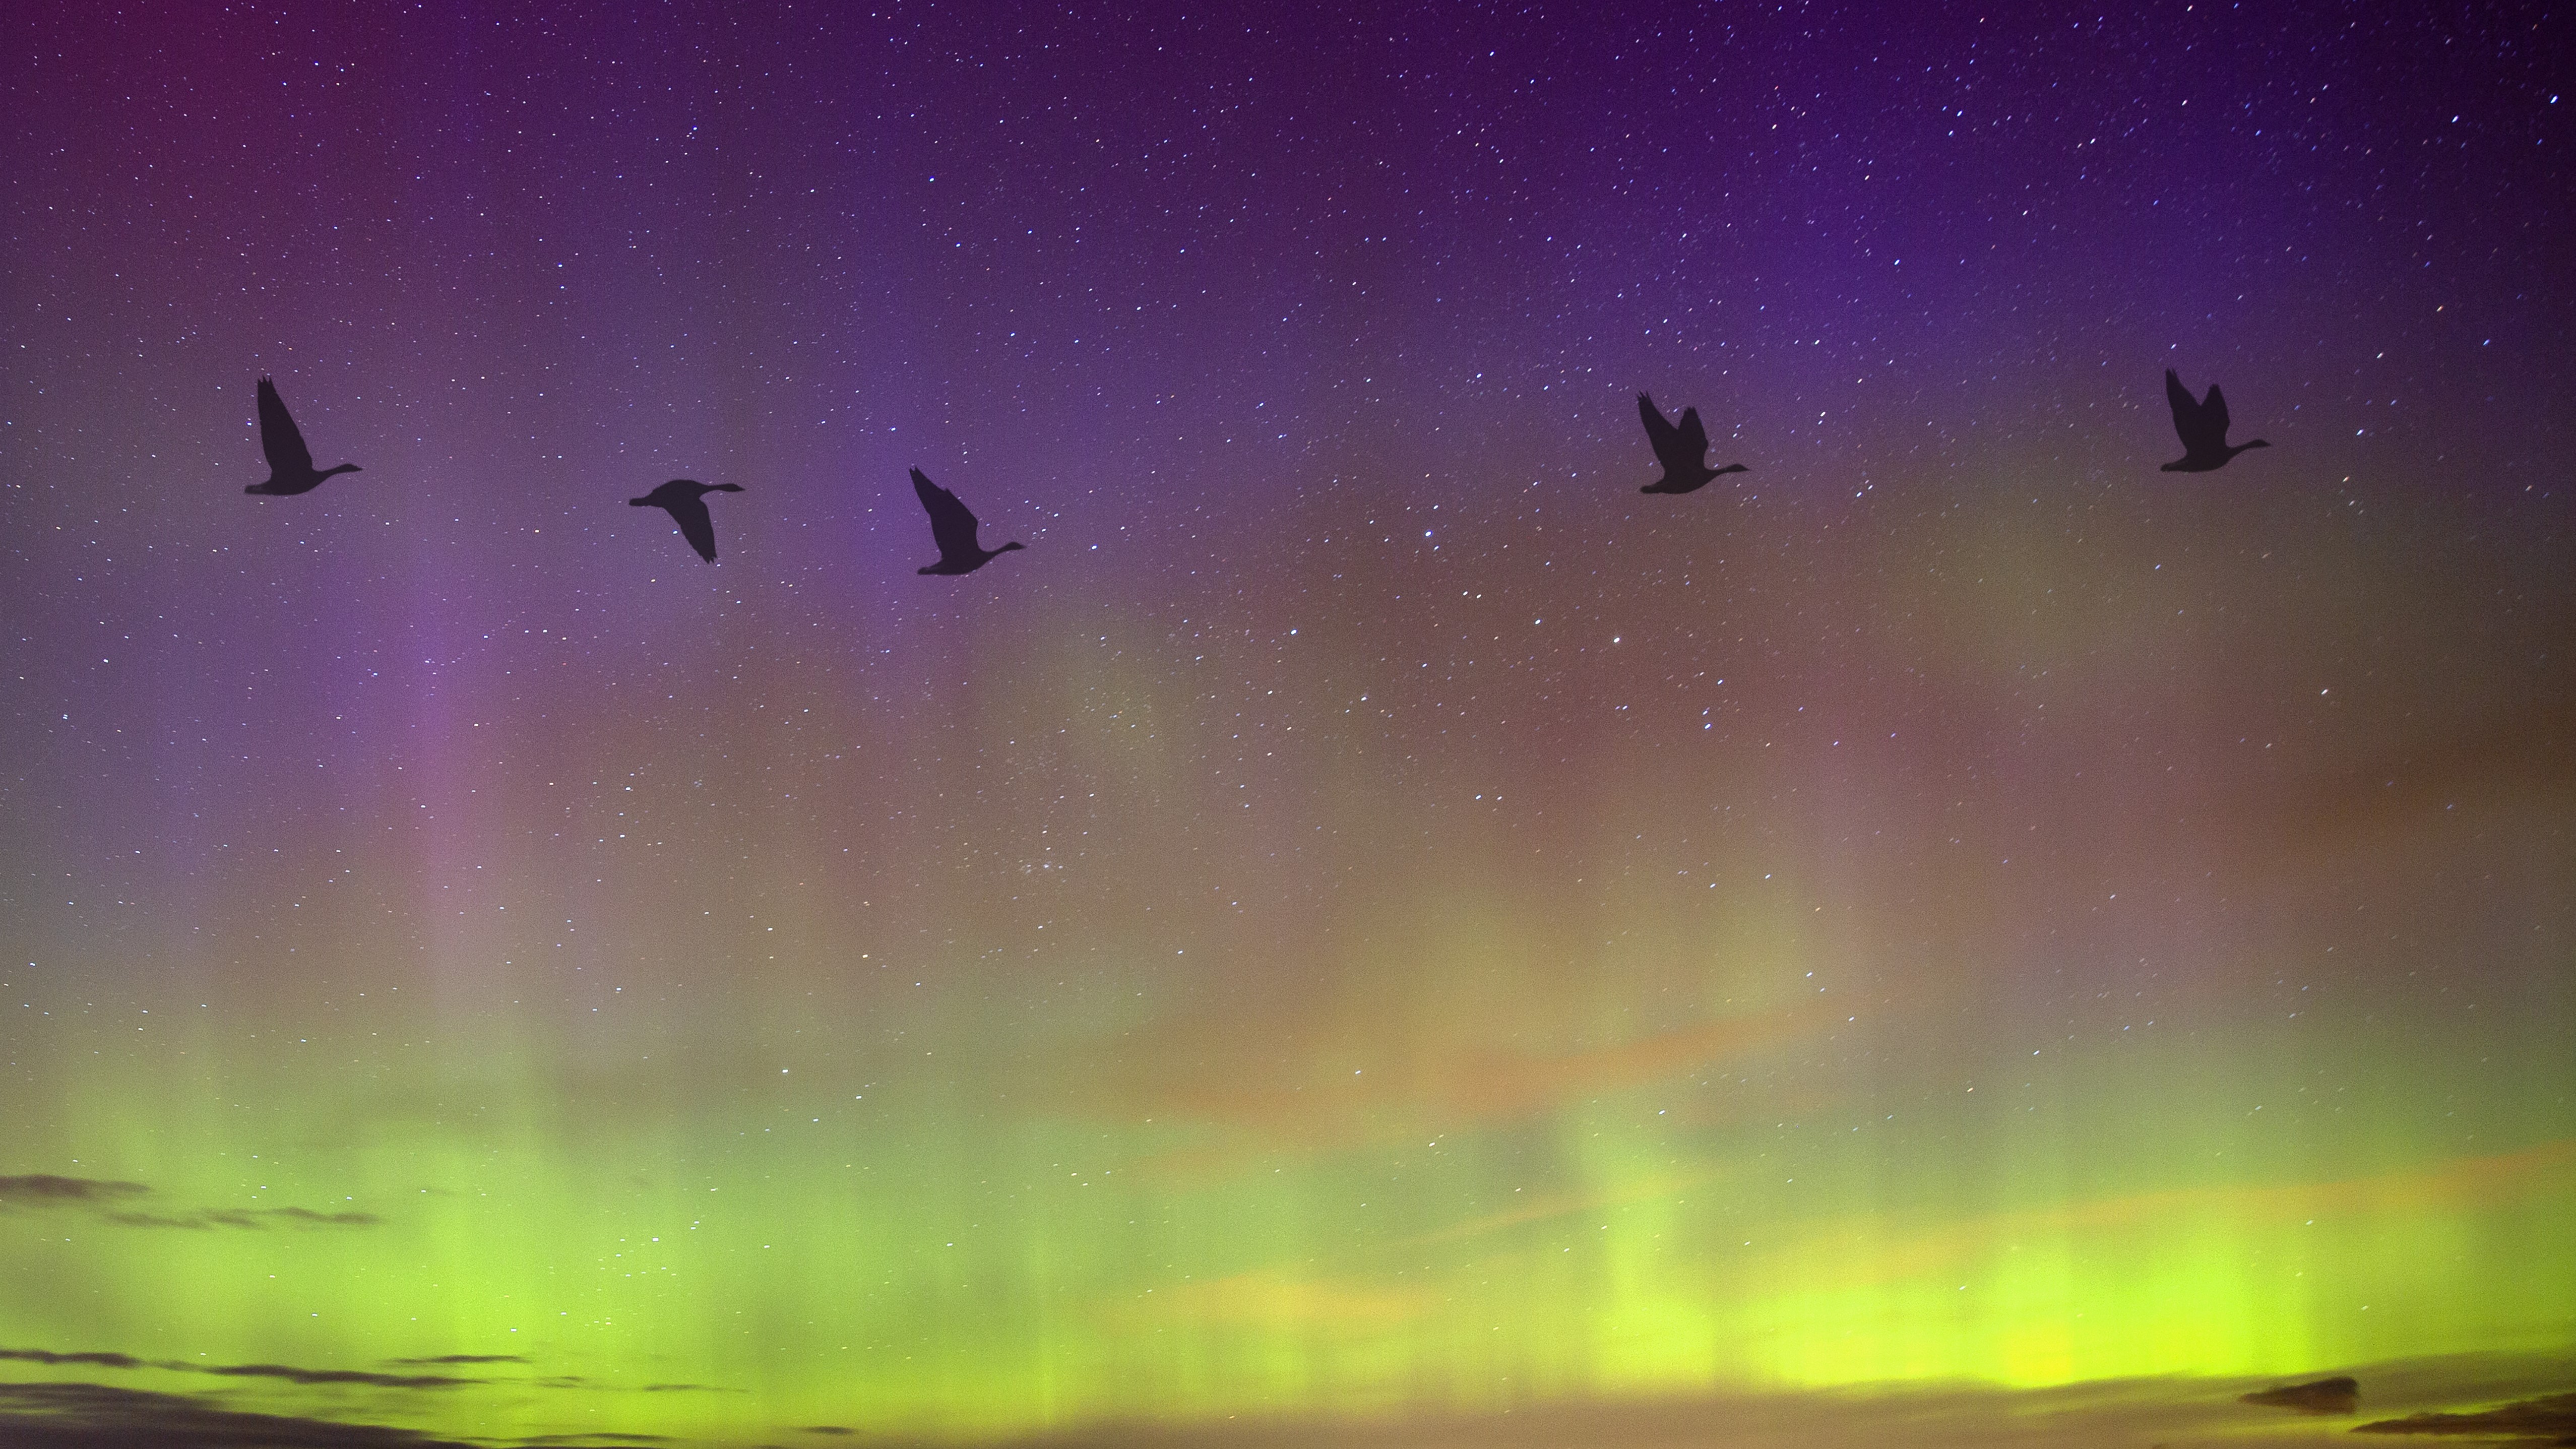 Severe space weather is messing up bird migrations, new study suggests Space